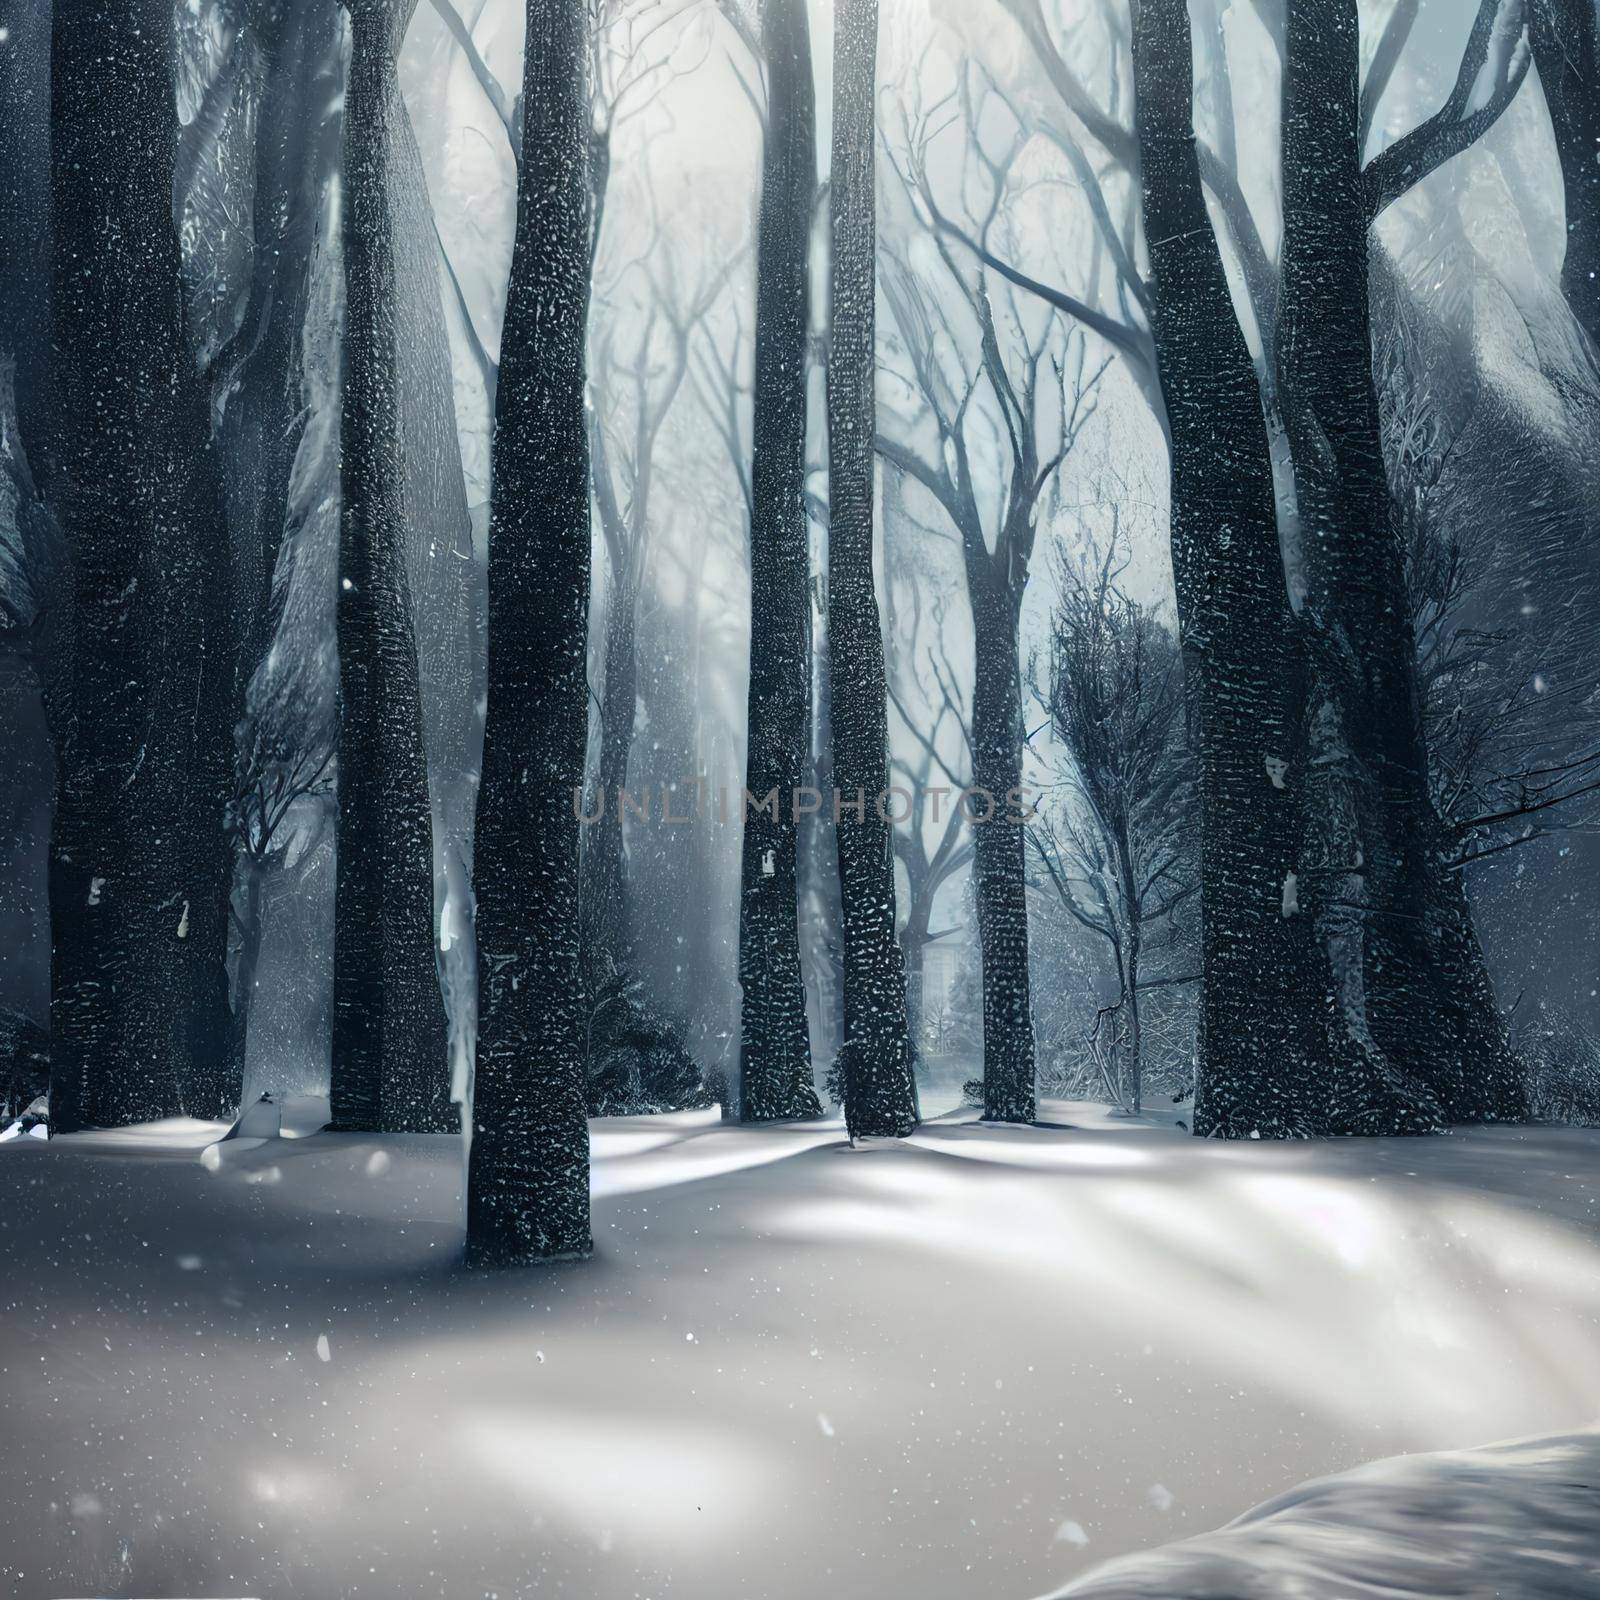 Gloomy image of a snowy forest. High quality illustration